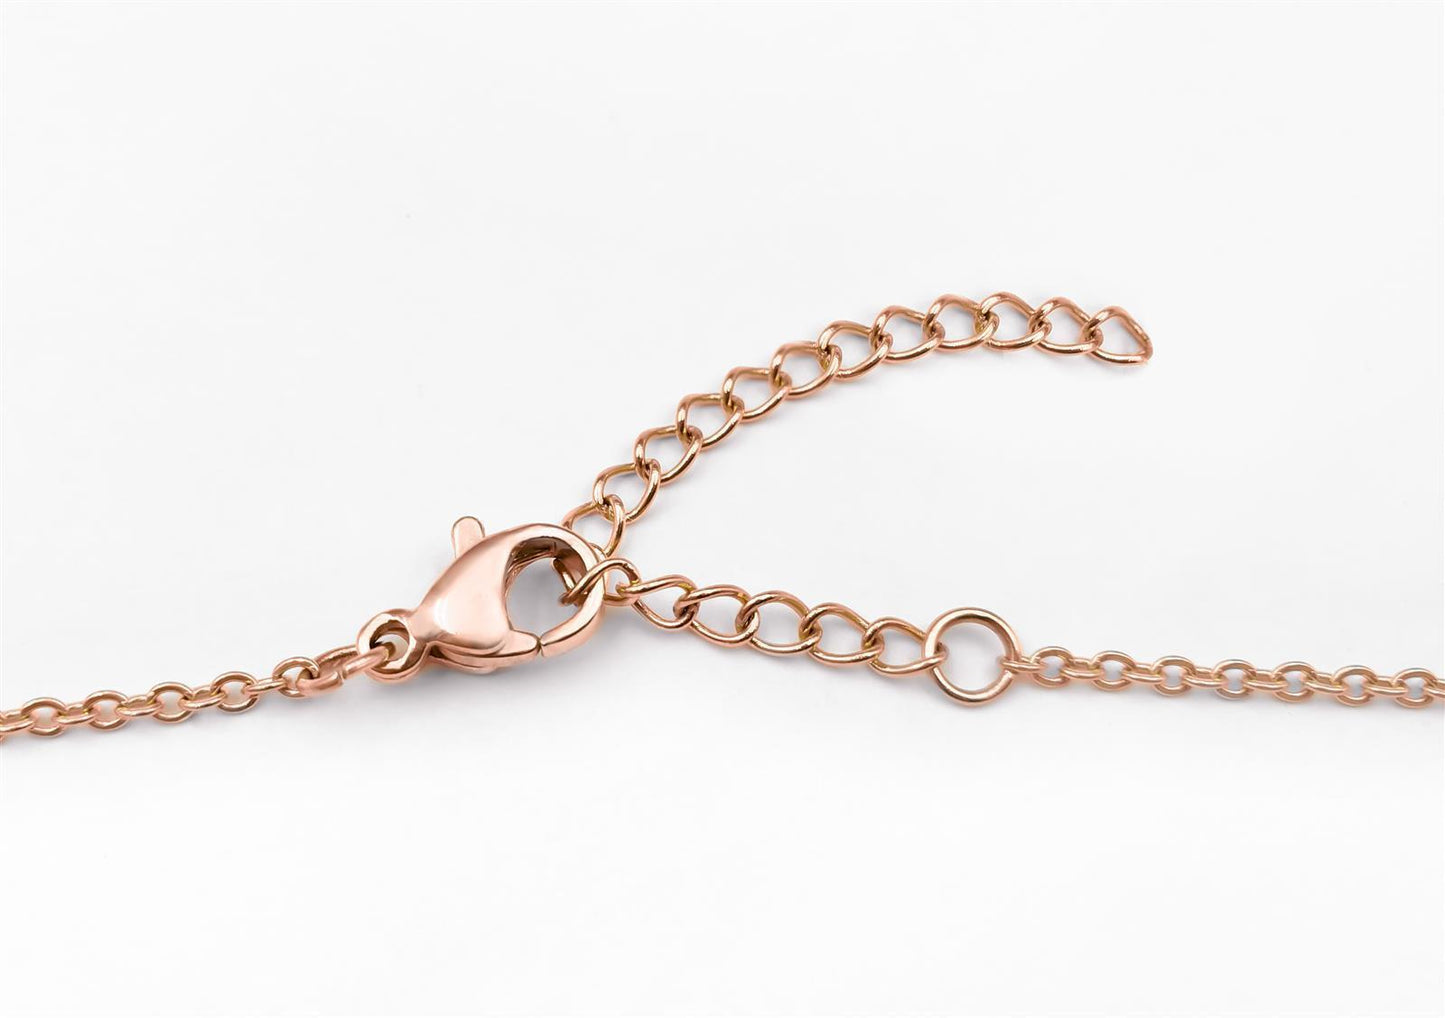 Lua Necklace rose gold